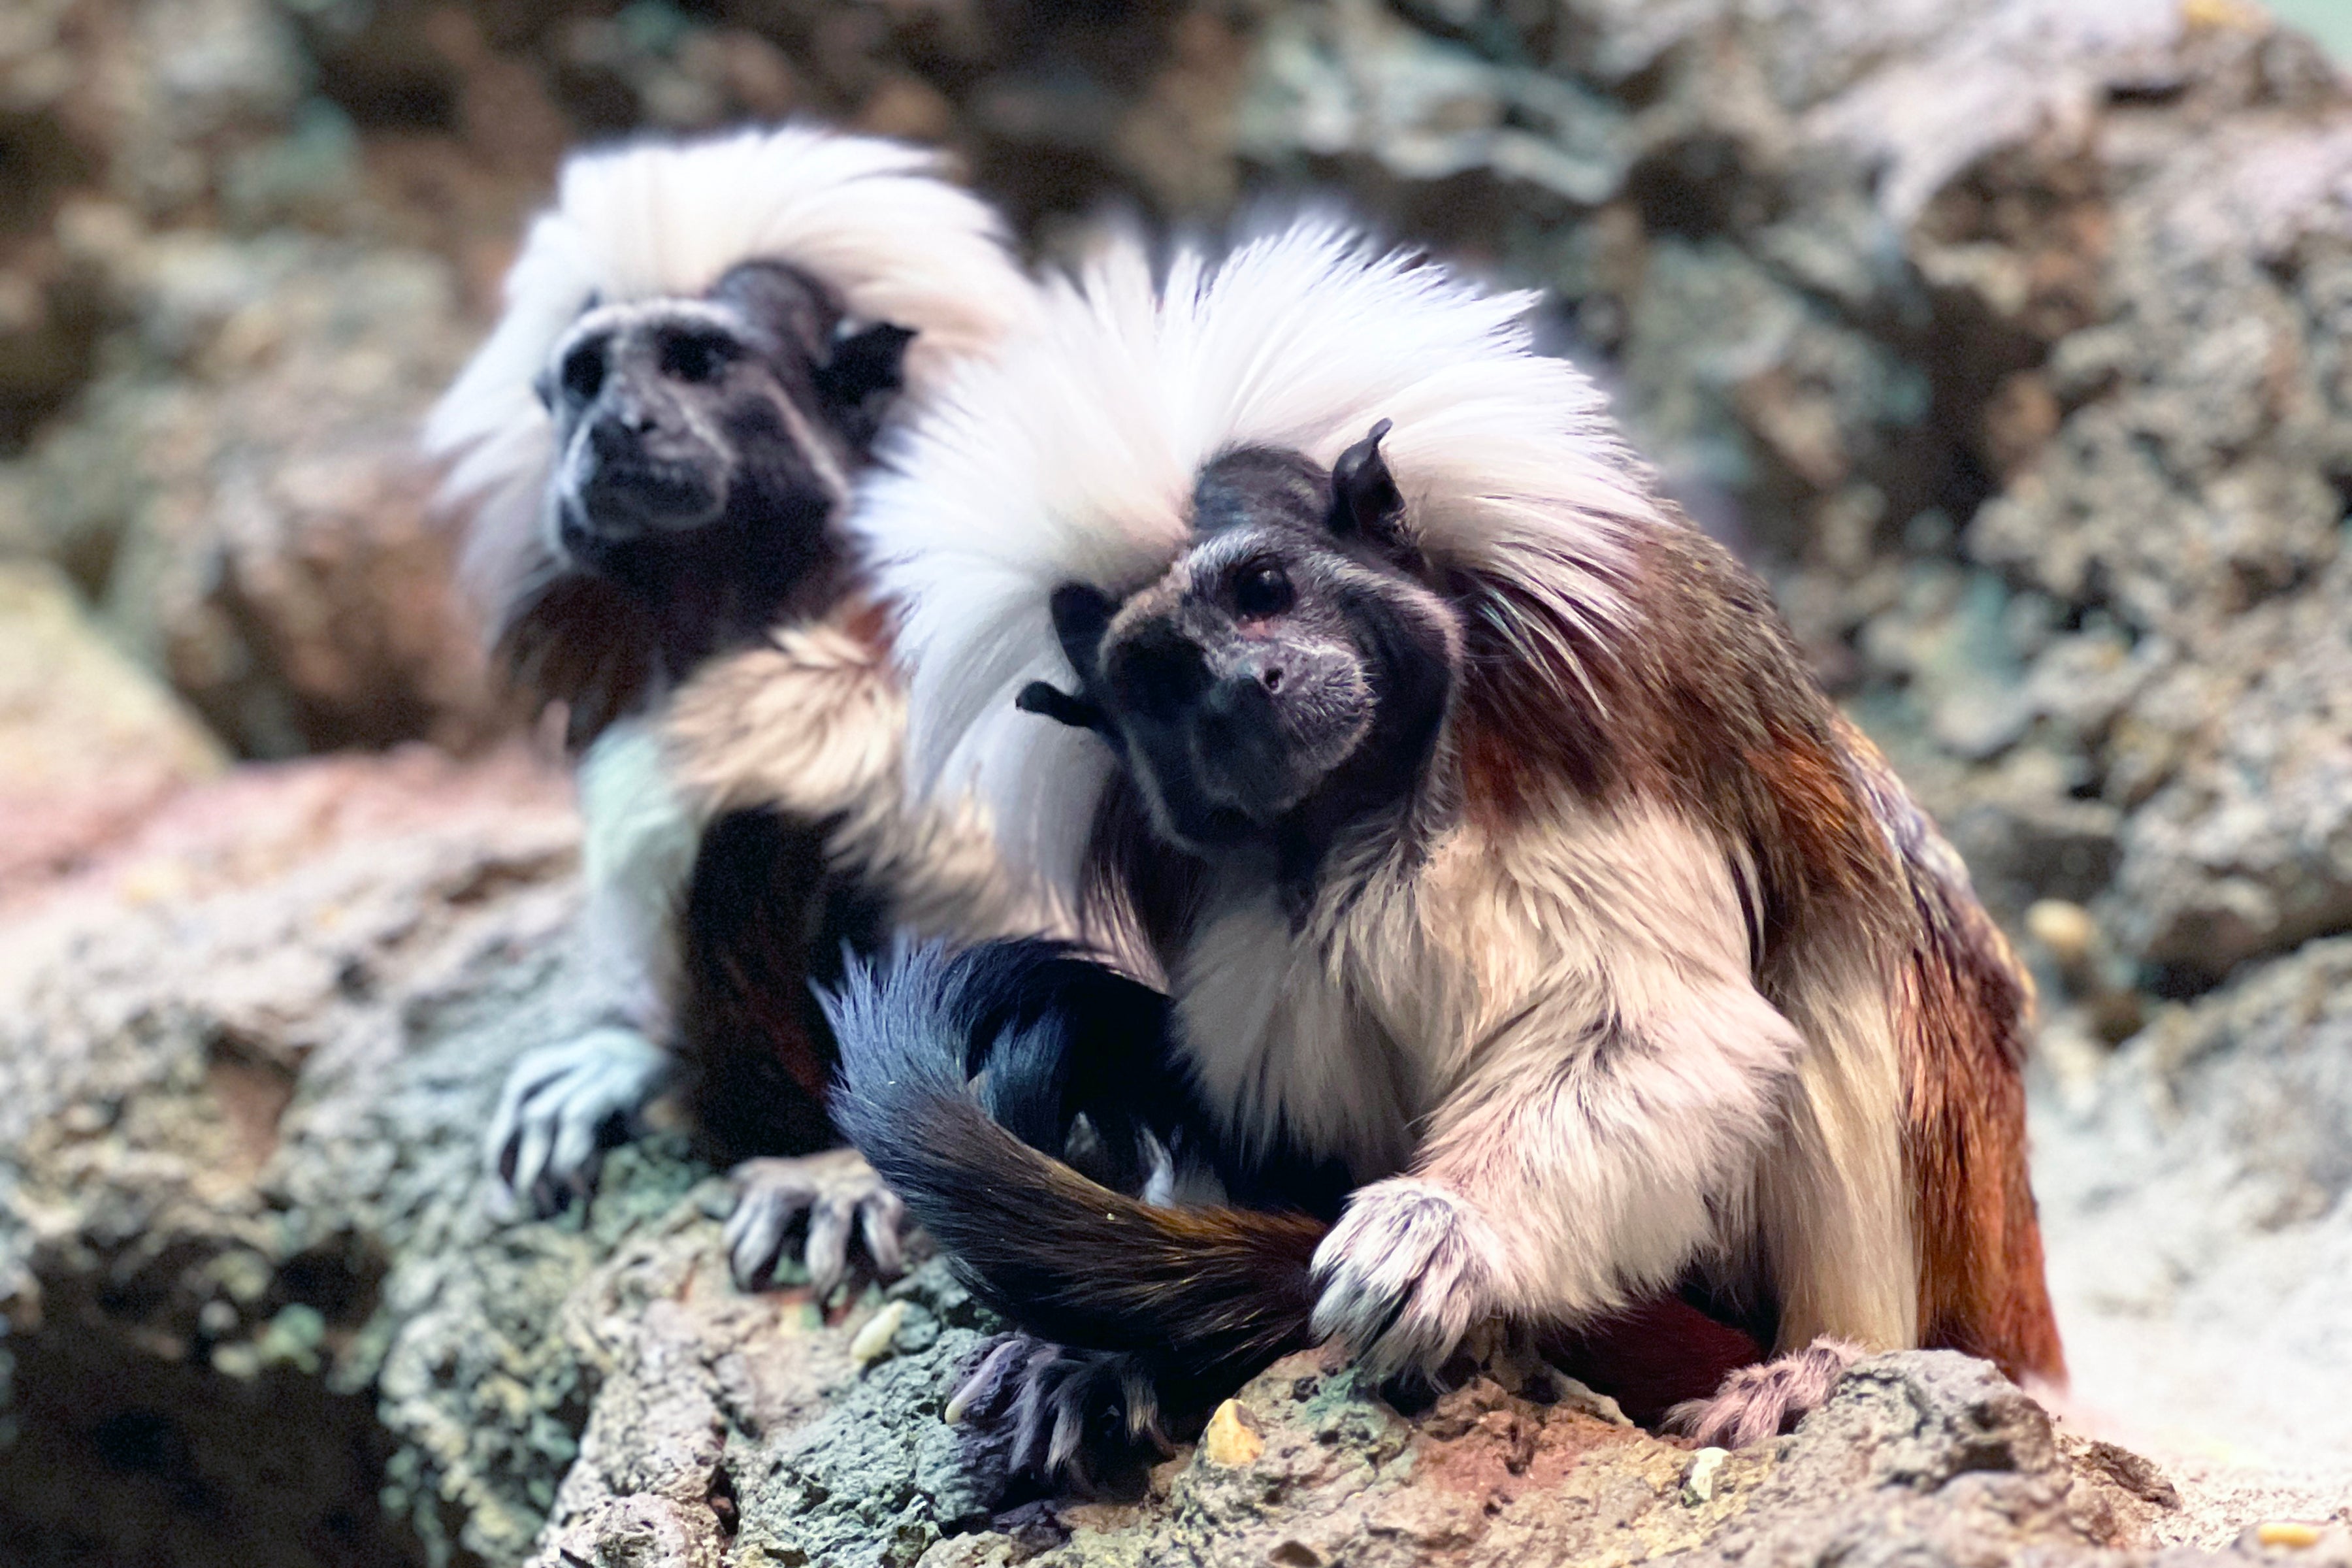 The public is invited to help name two cotton-top tamarin sisters at the Smithsonian’s National Zoo and Conservation Biology Institute. Photo 1 credit: Chelia Chong, Smithsonian’s National Zoo and Conservation Biology Institute 